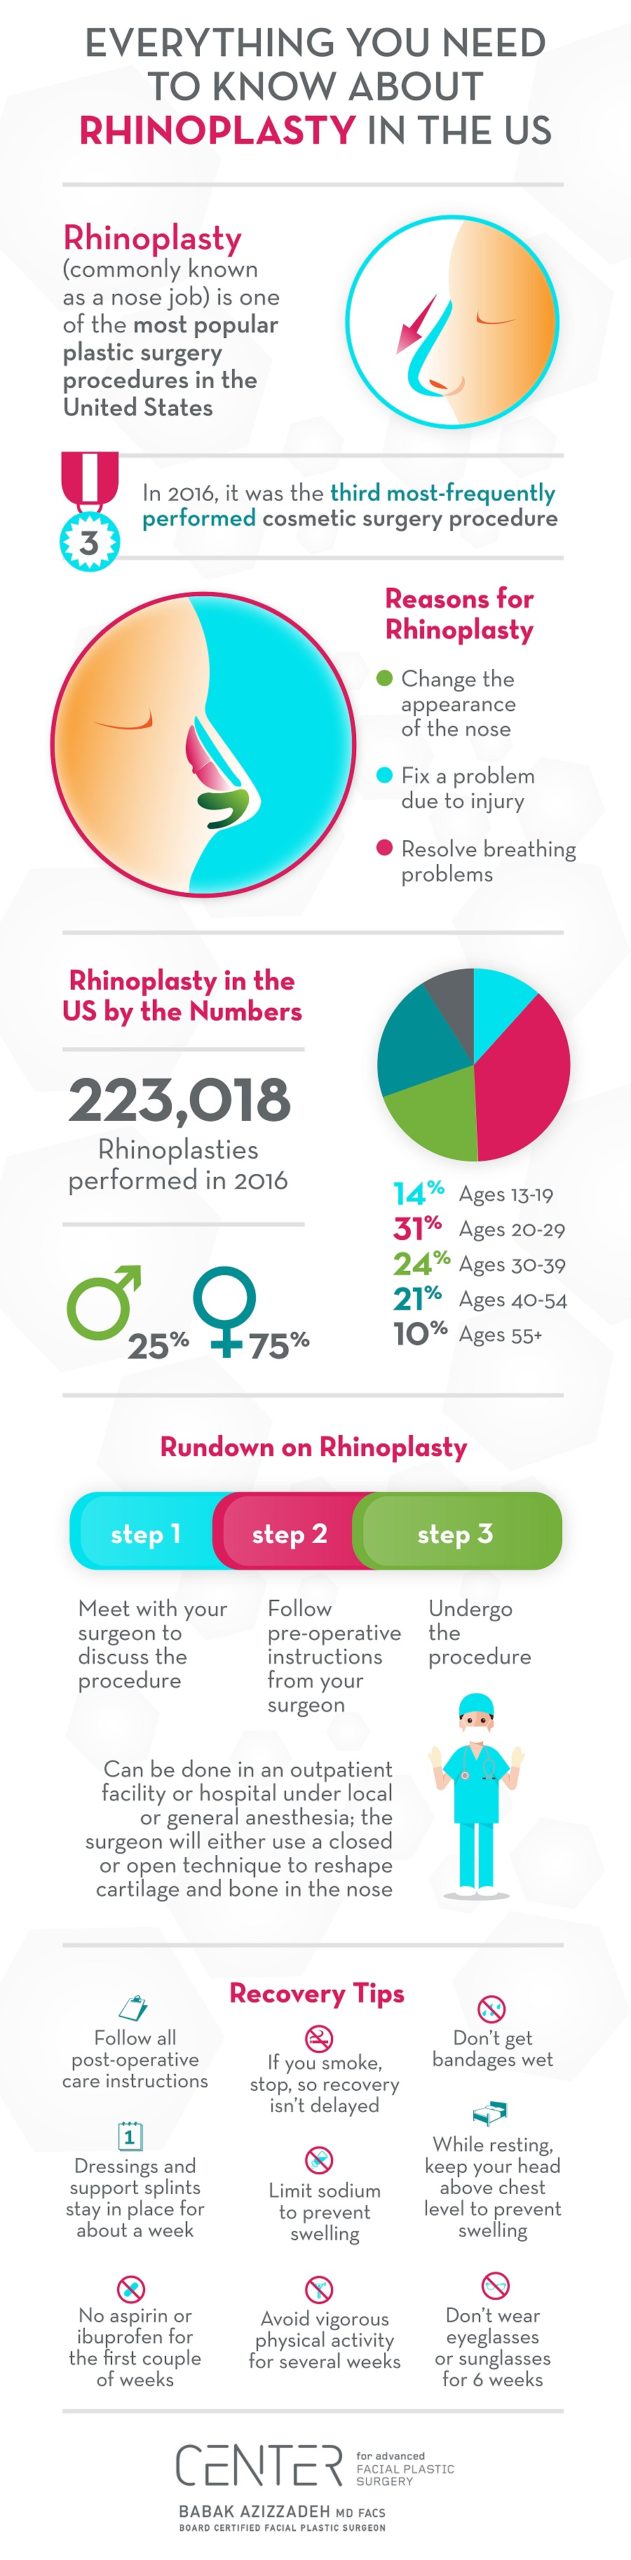 Everything You Need to Know About Rhinoplasty in the U.S.